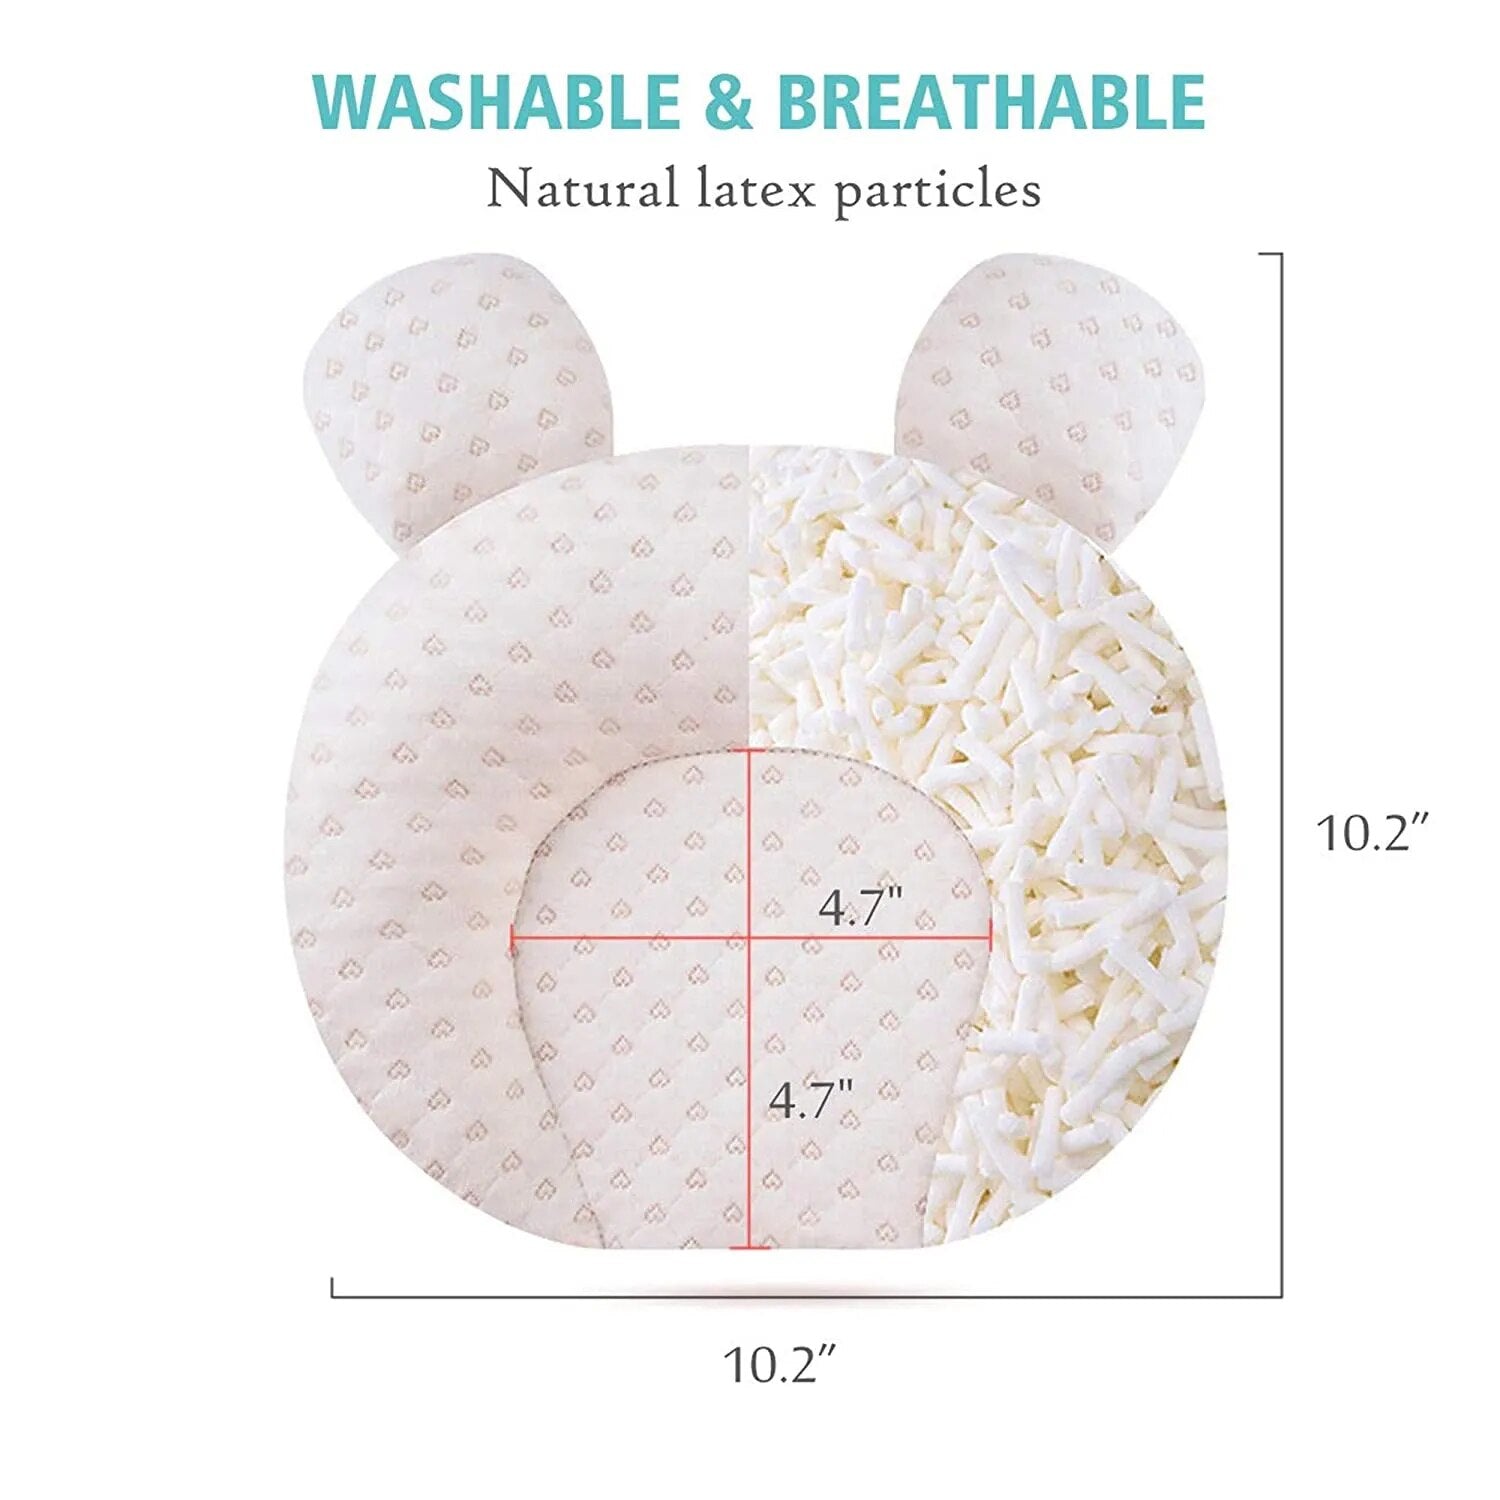 Baby Pillow Newborn Head Protector Cotton Sleeping Protection Pillows Infant Travel Cushion Baby Bedding for 0-1 Years Old